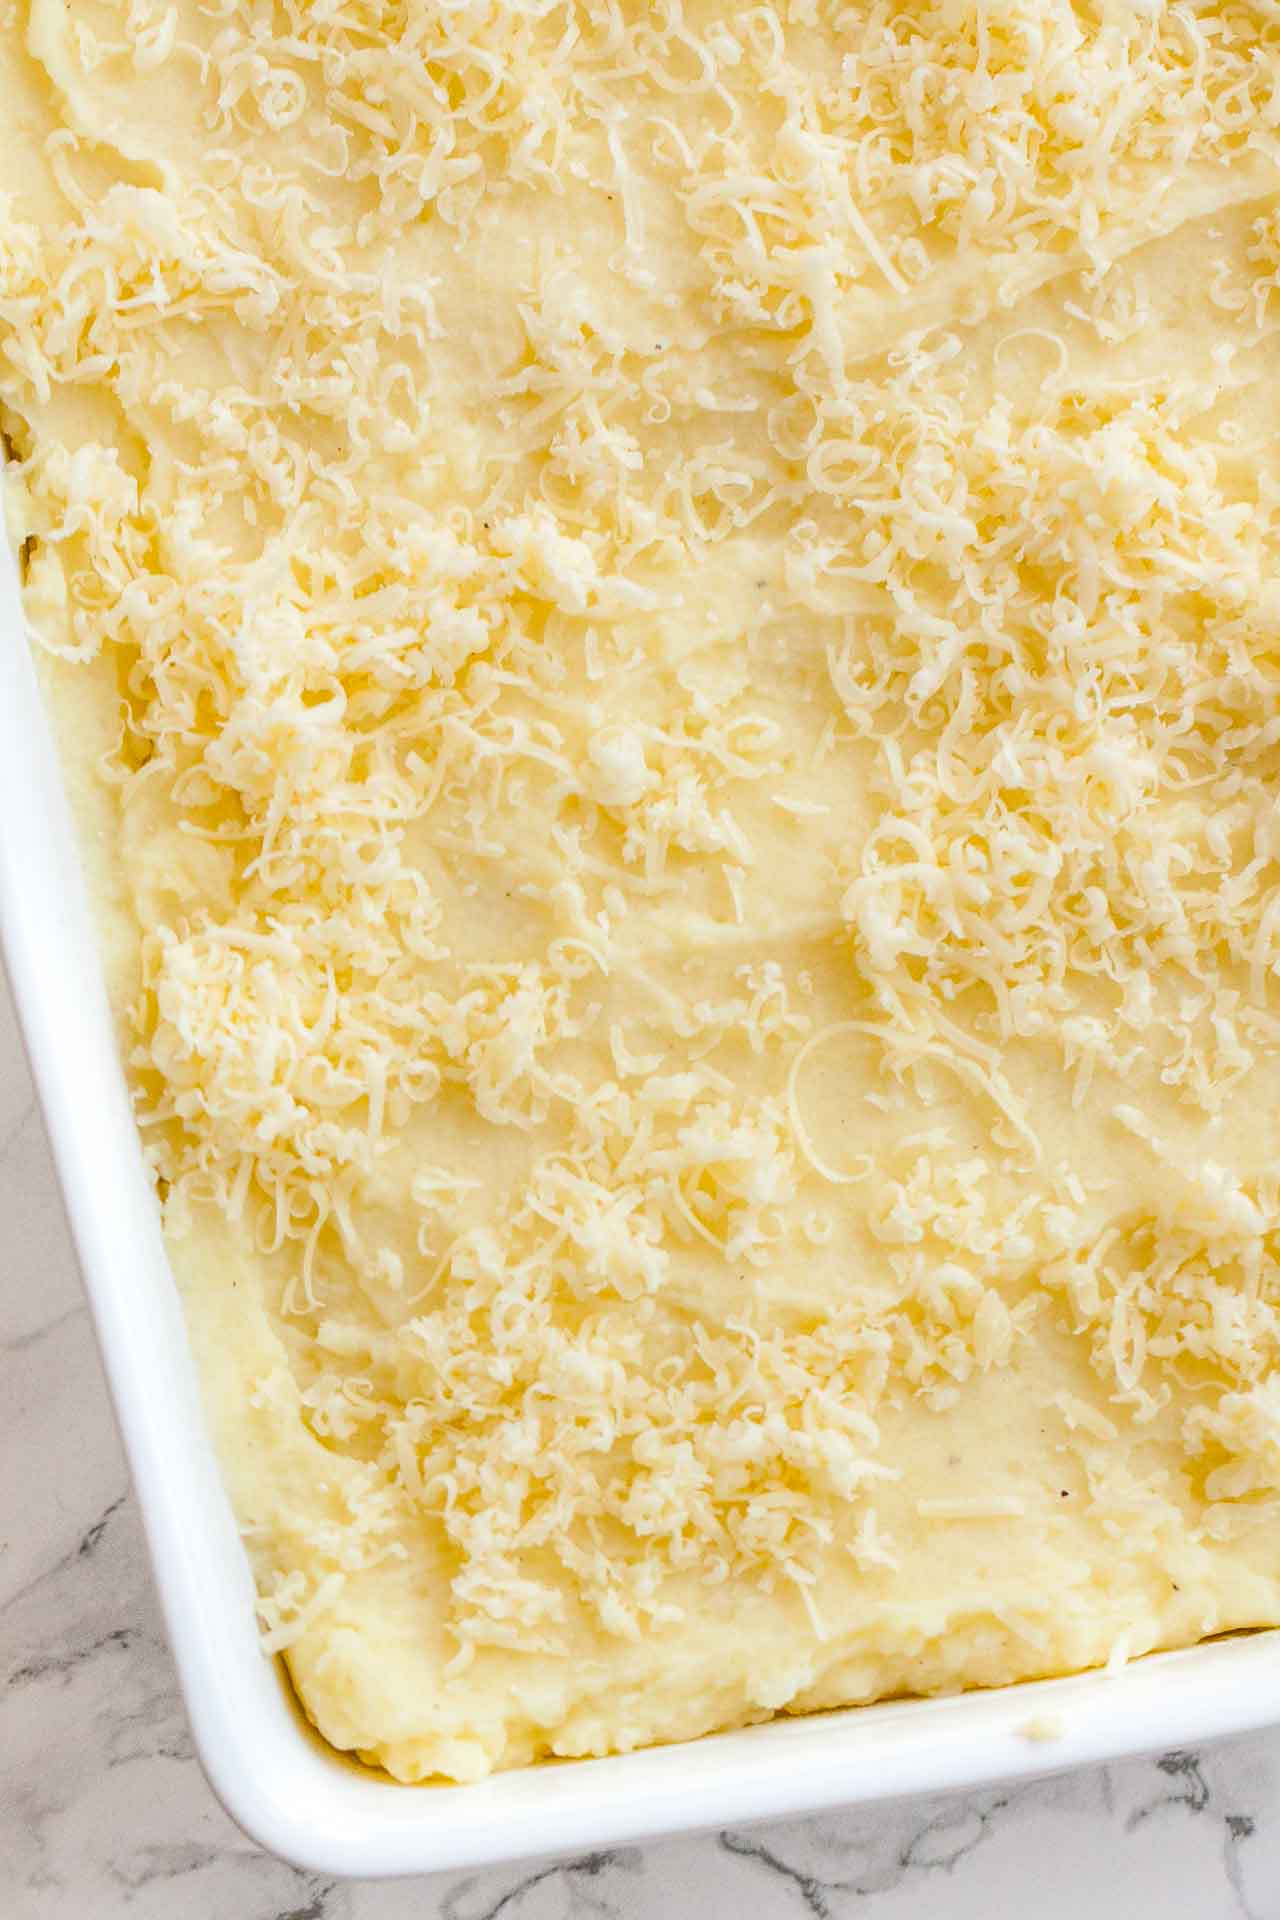 A layer of mashed potatoes topped with cheese in a white baking dish on a marble surface.